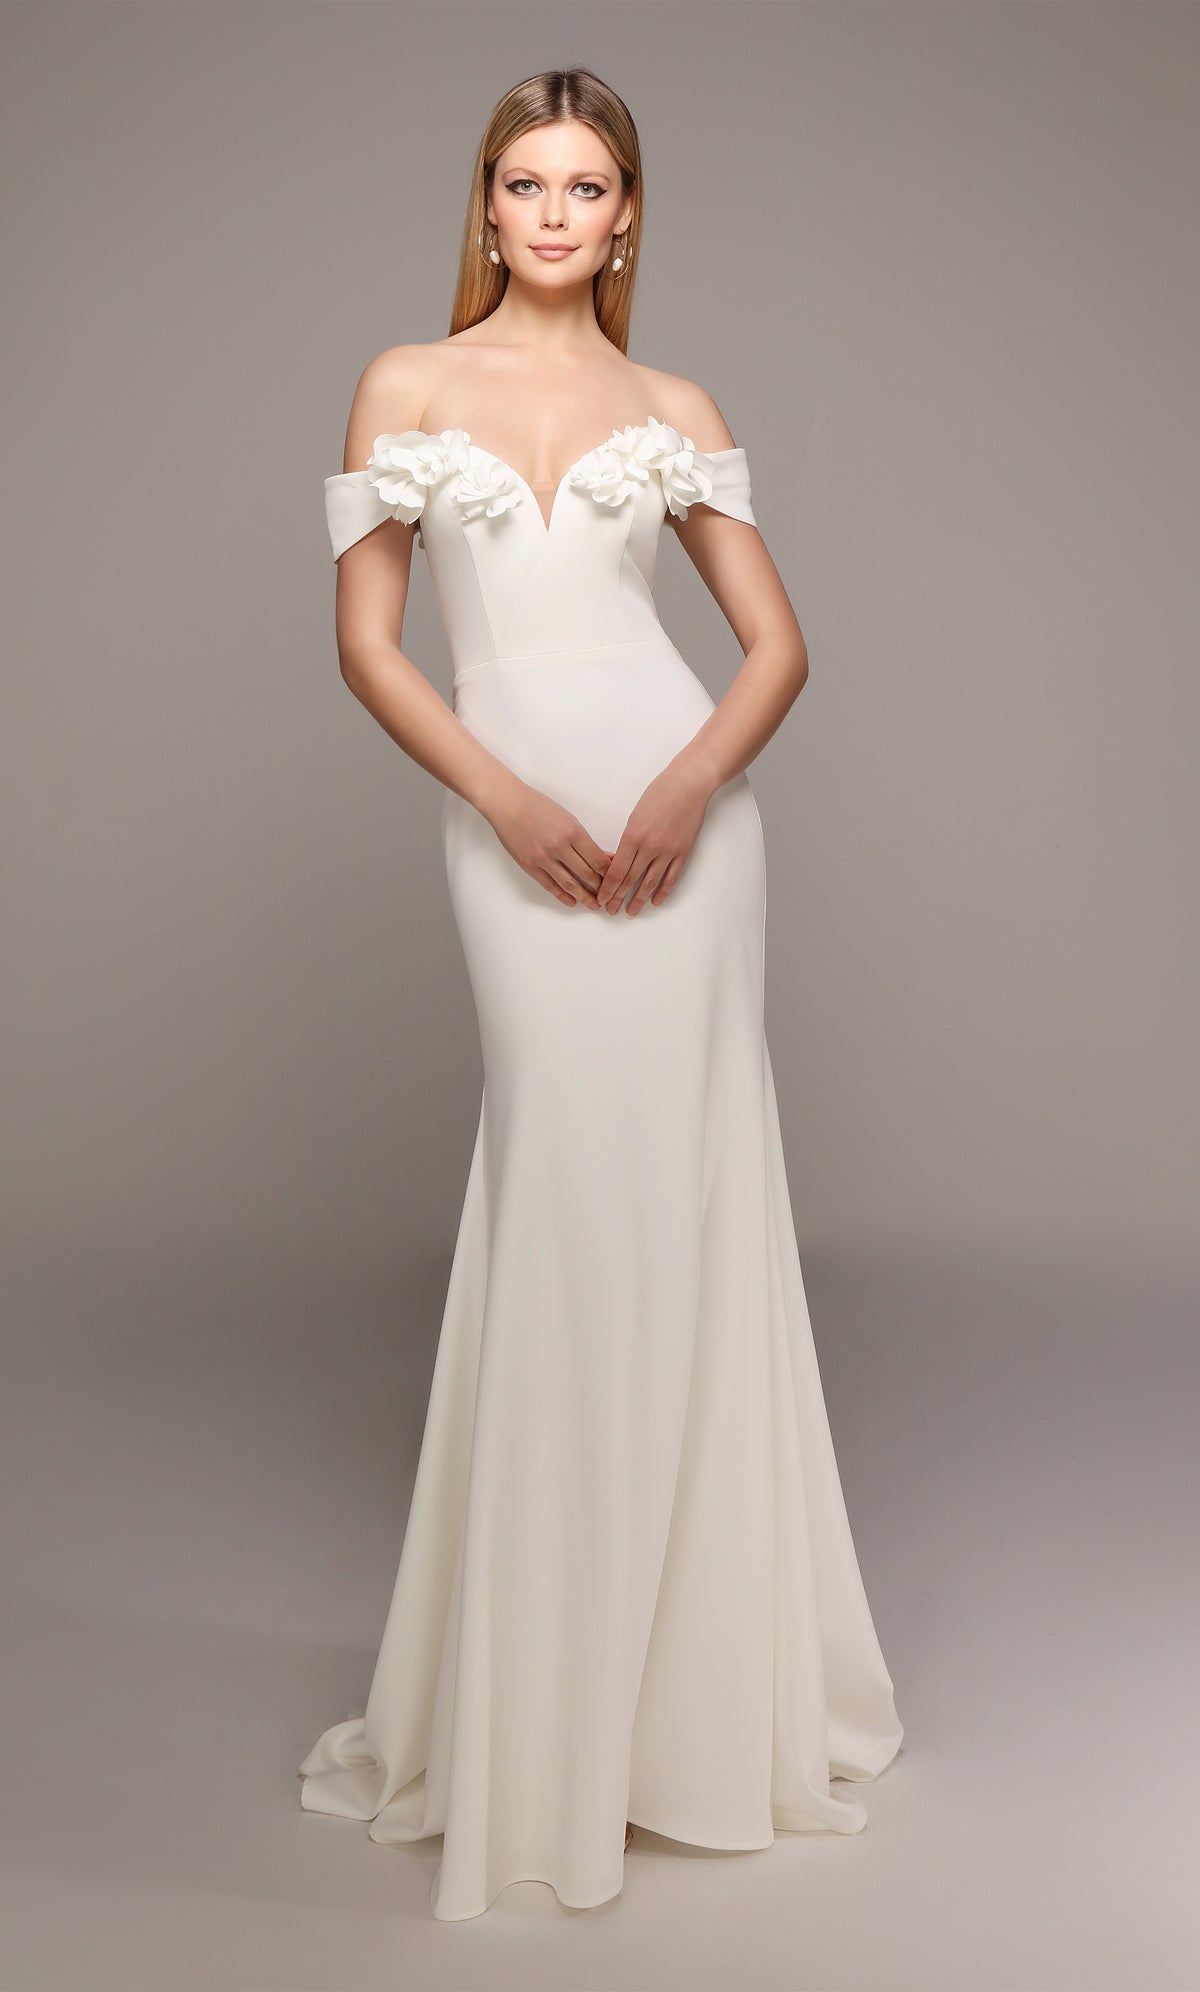 Ivory fit and flare wedding dress featuring an off the shoulder bodice enhanced with a beautiful flower volant and train.